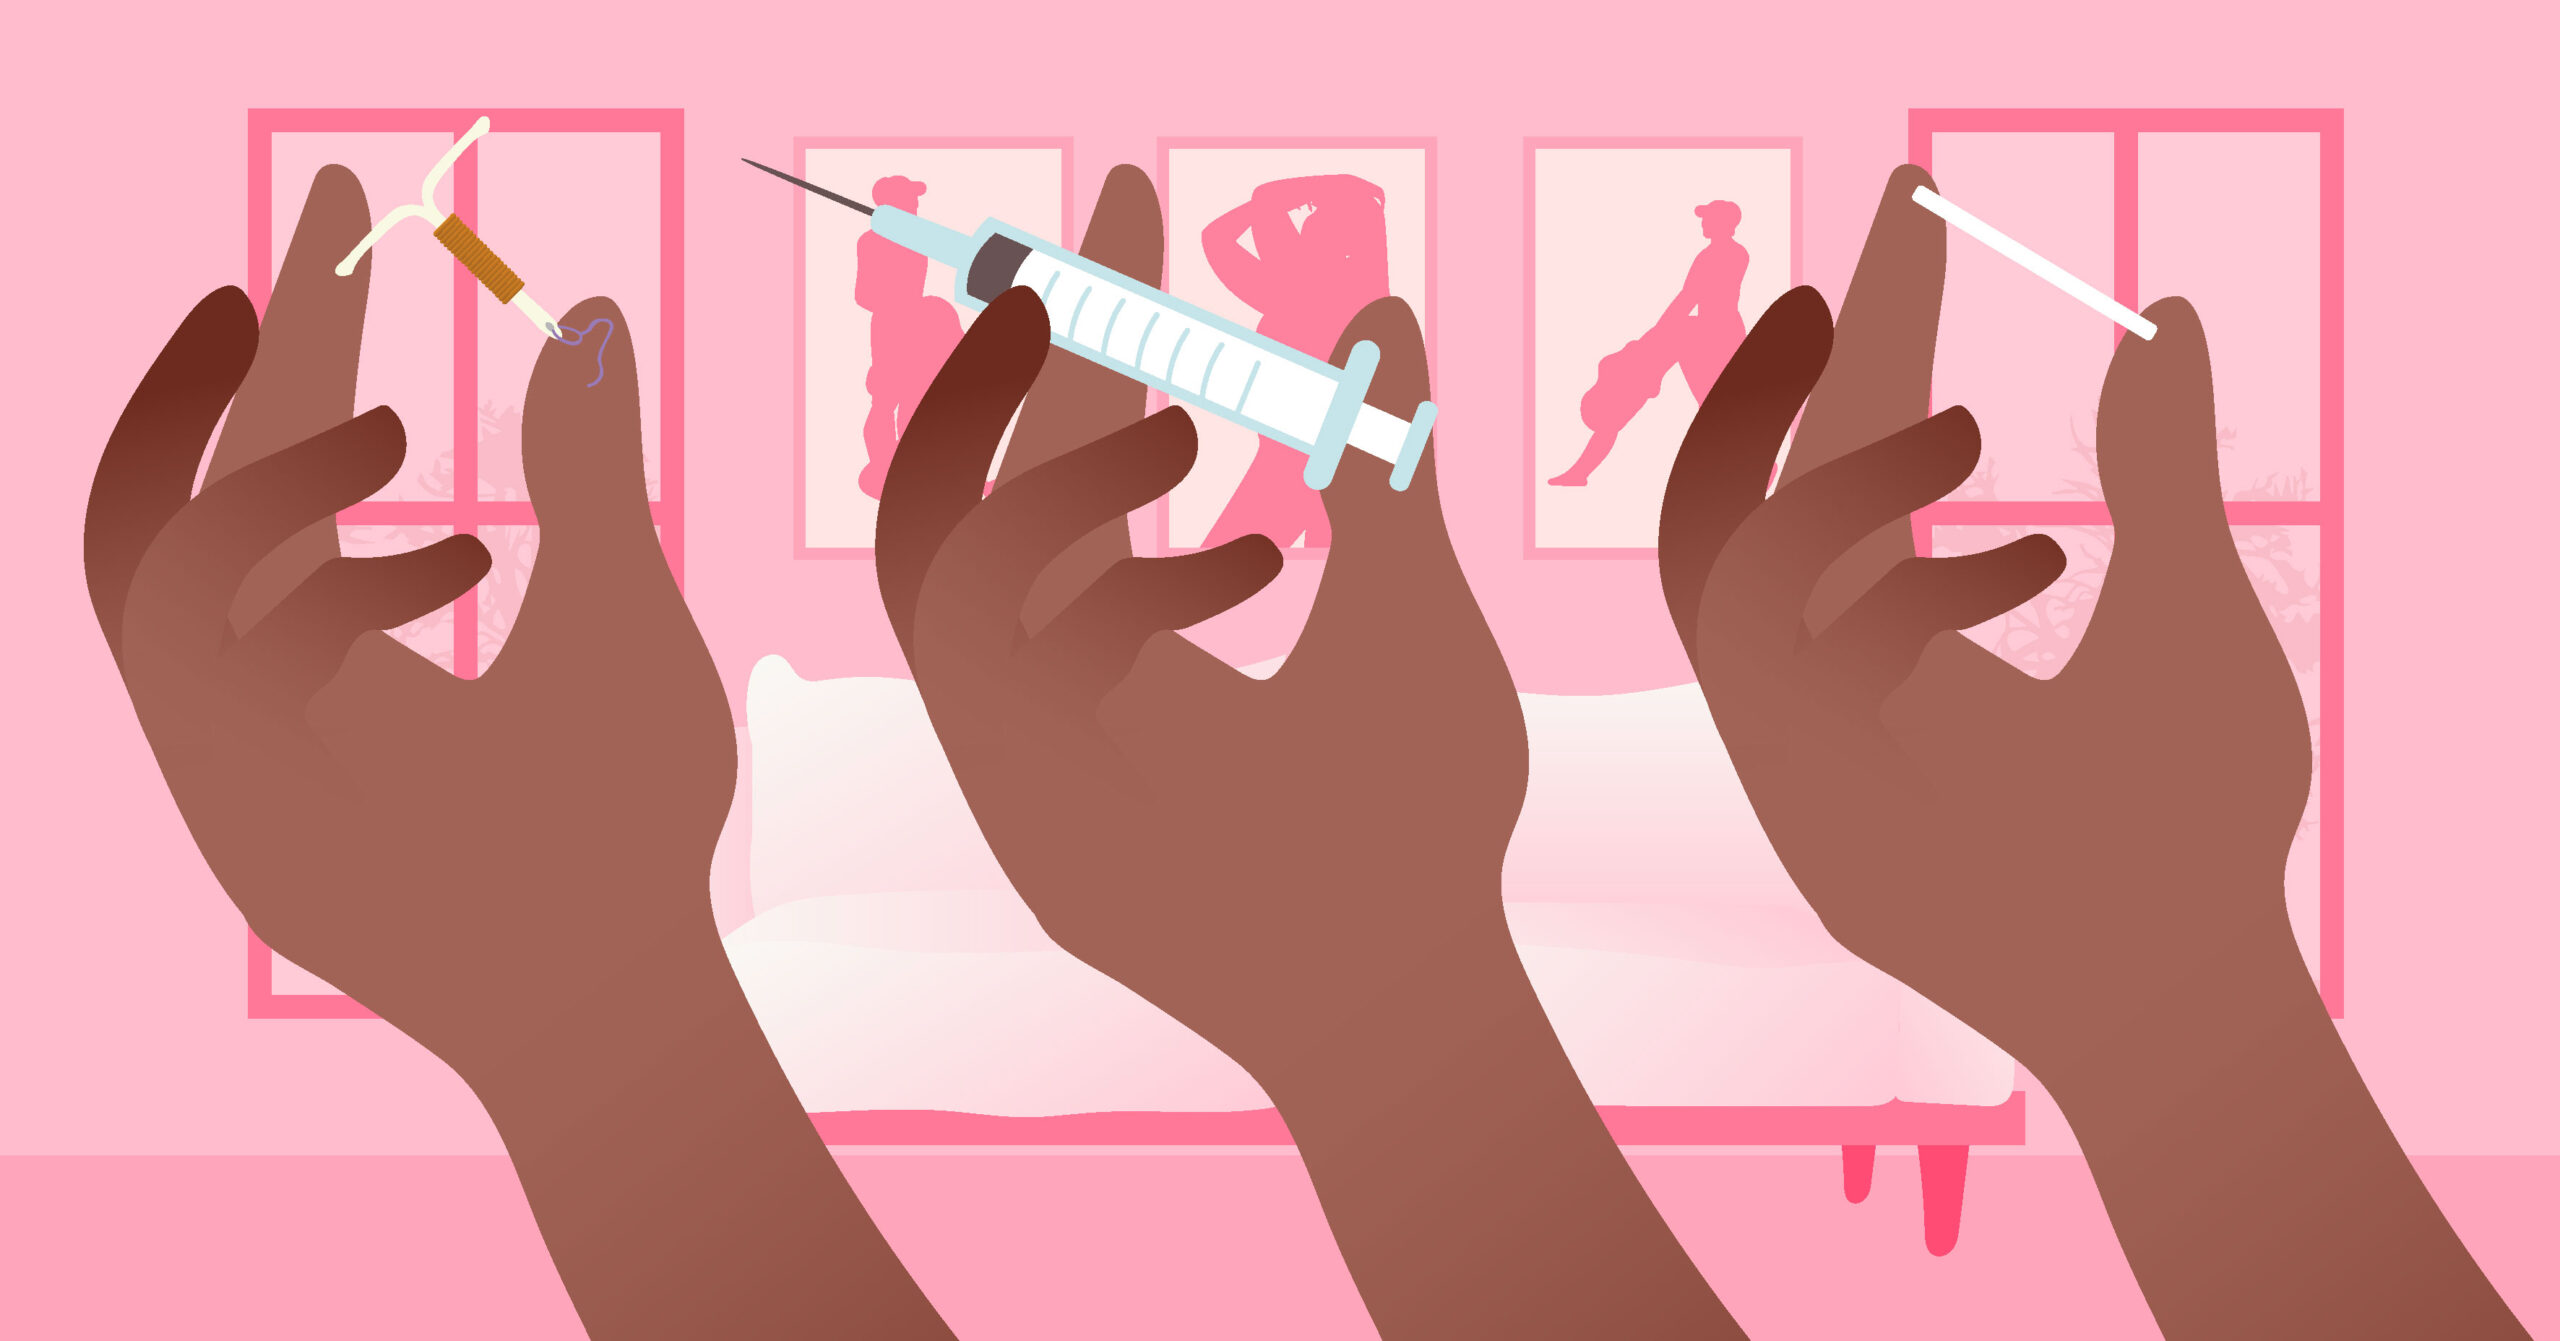 10 Pros & Cons of Long-Acting Reversible Contraception (LARC)